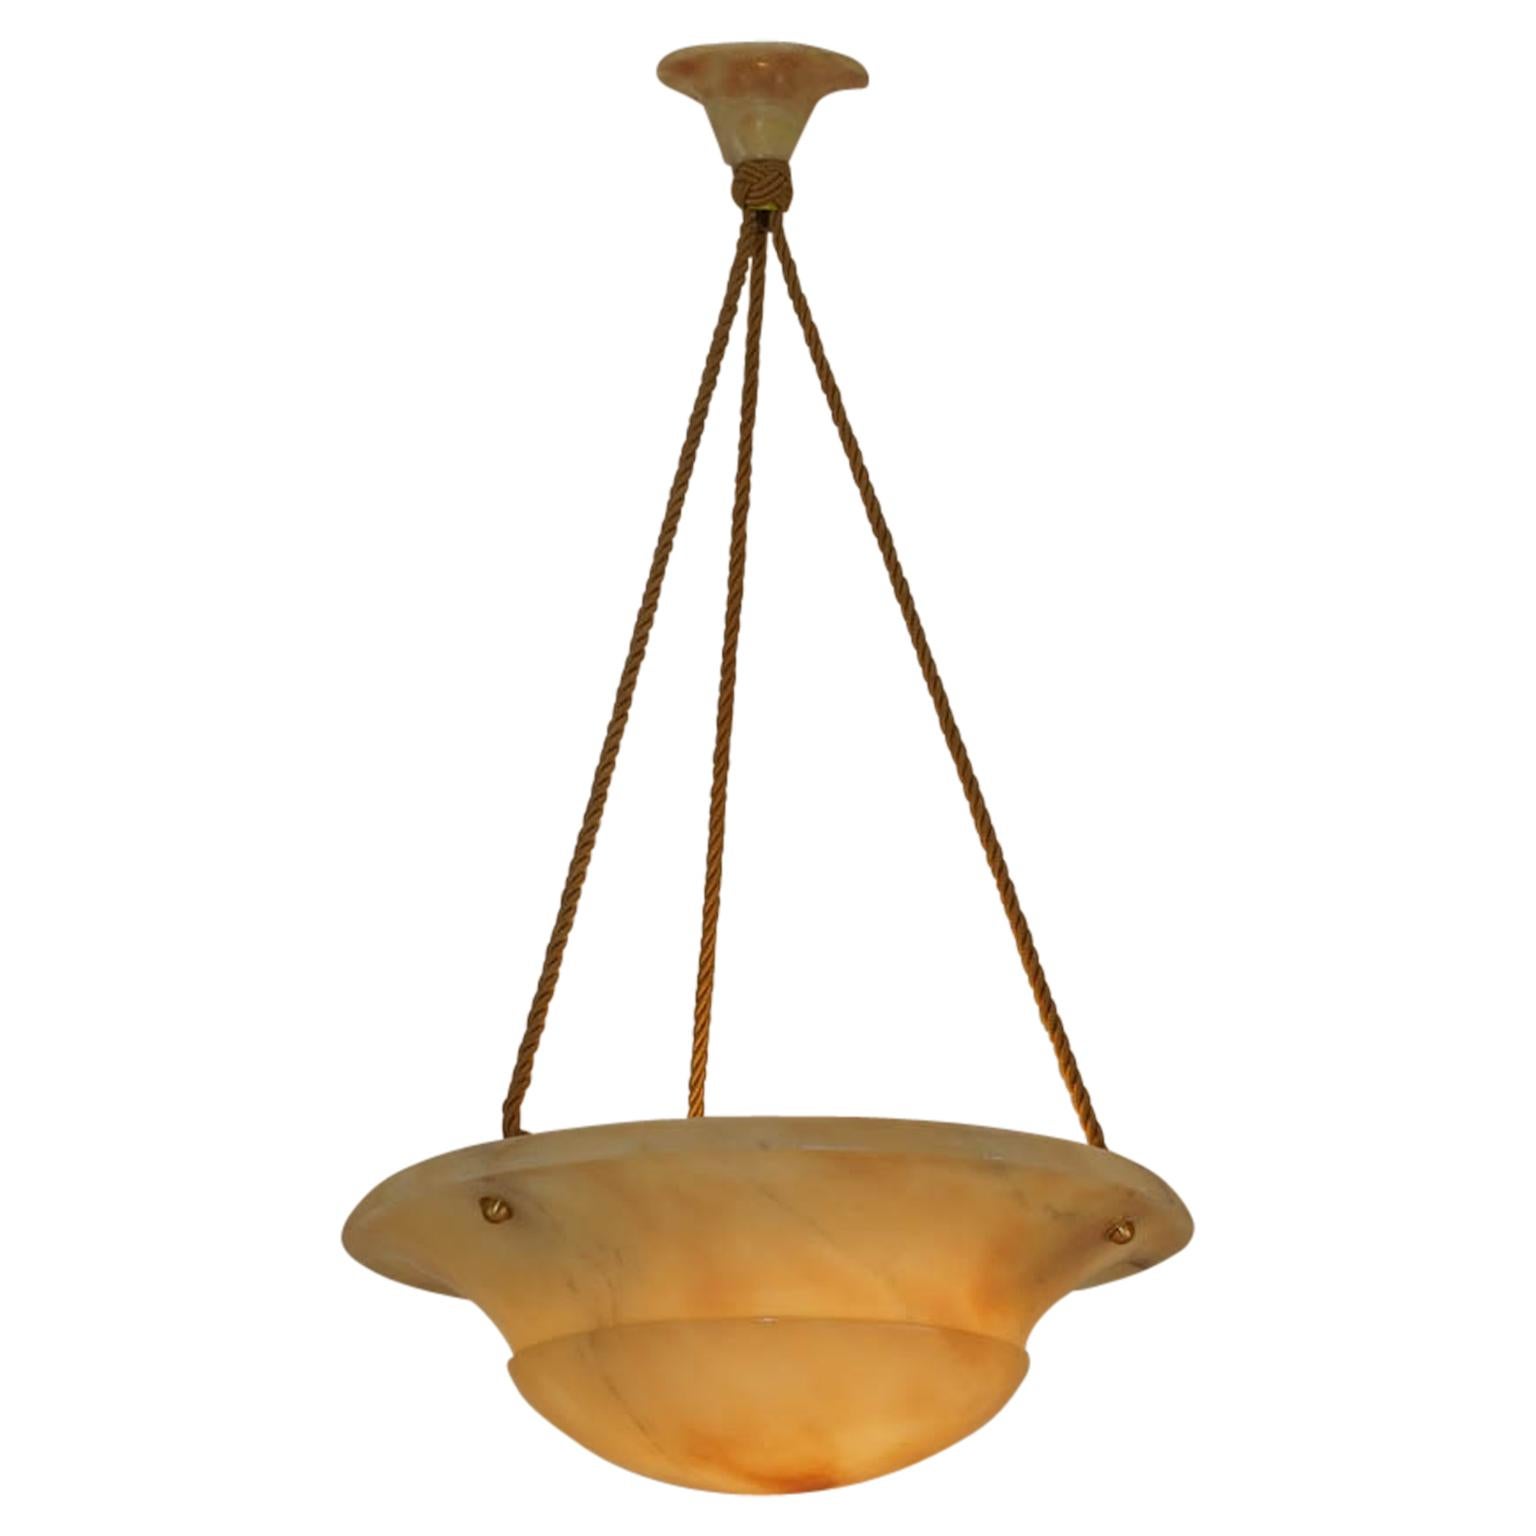 This unusual colored alabaster stone hints of citrus tones of lemon, tangerine, and of peach. Recently rewired on a set of three electrified ropes, the fixture holds three 60 watt incandescent bulbs or any wattage LED bulbs. Custom drop available at